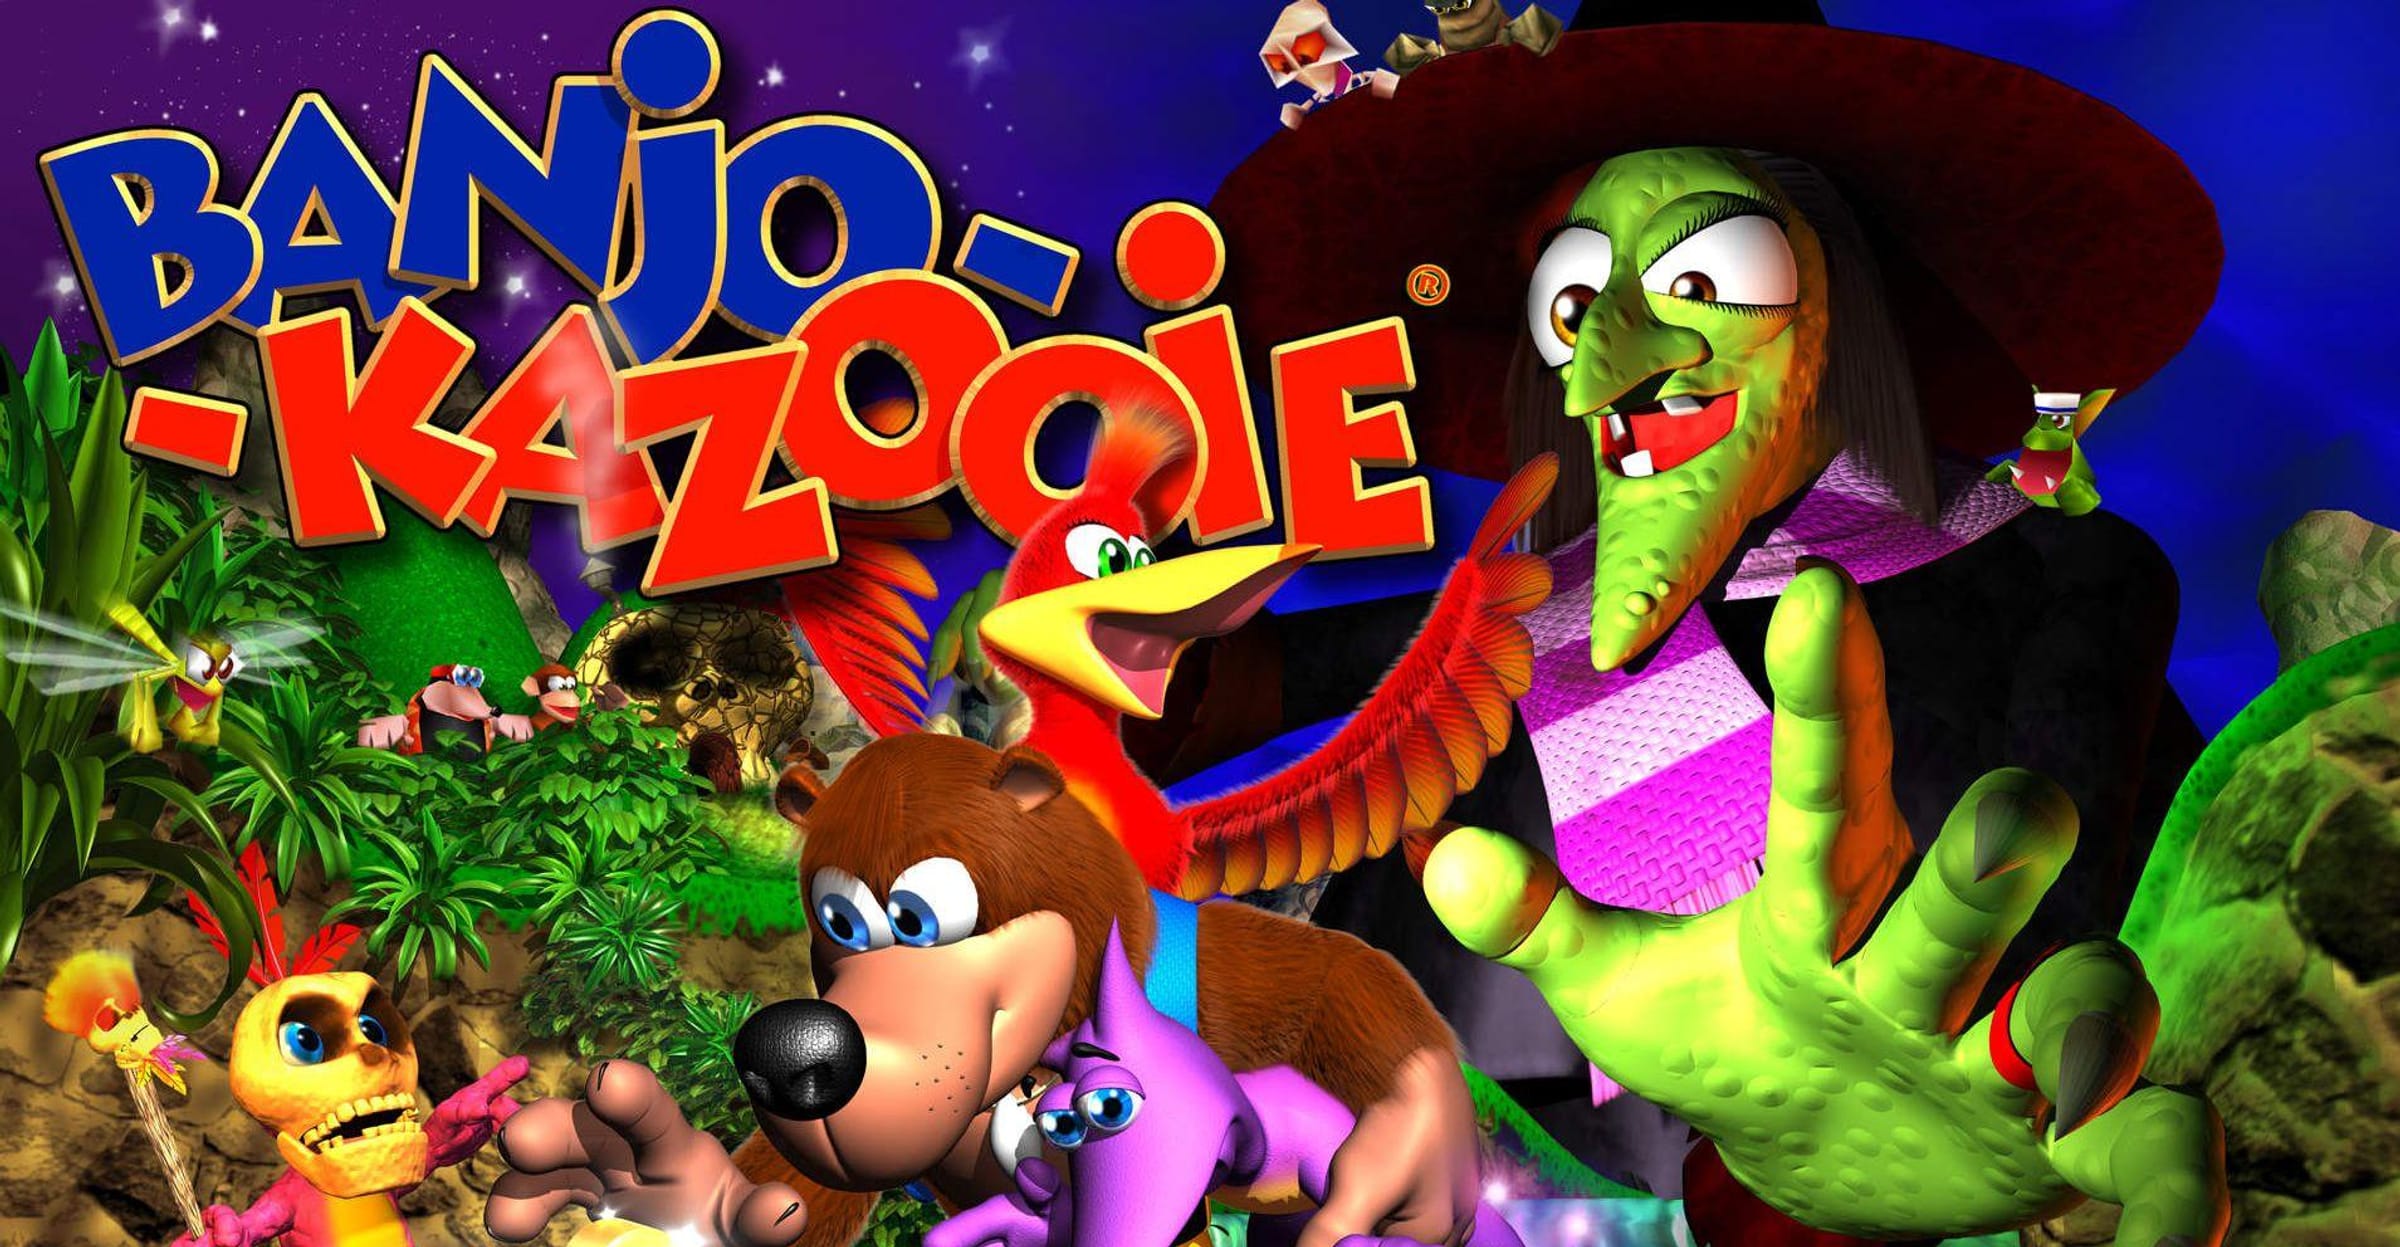 The Last Of Us Star Says Banjo-Kazooie Was So Good It Made Him